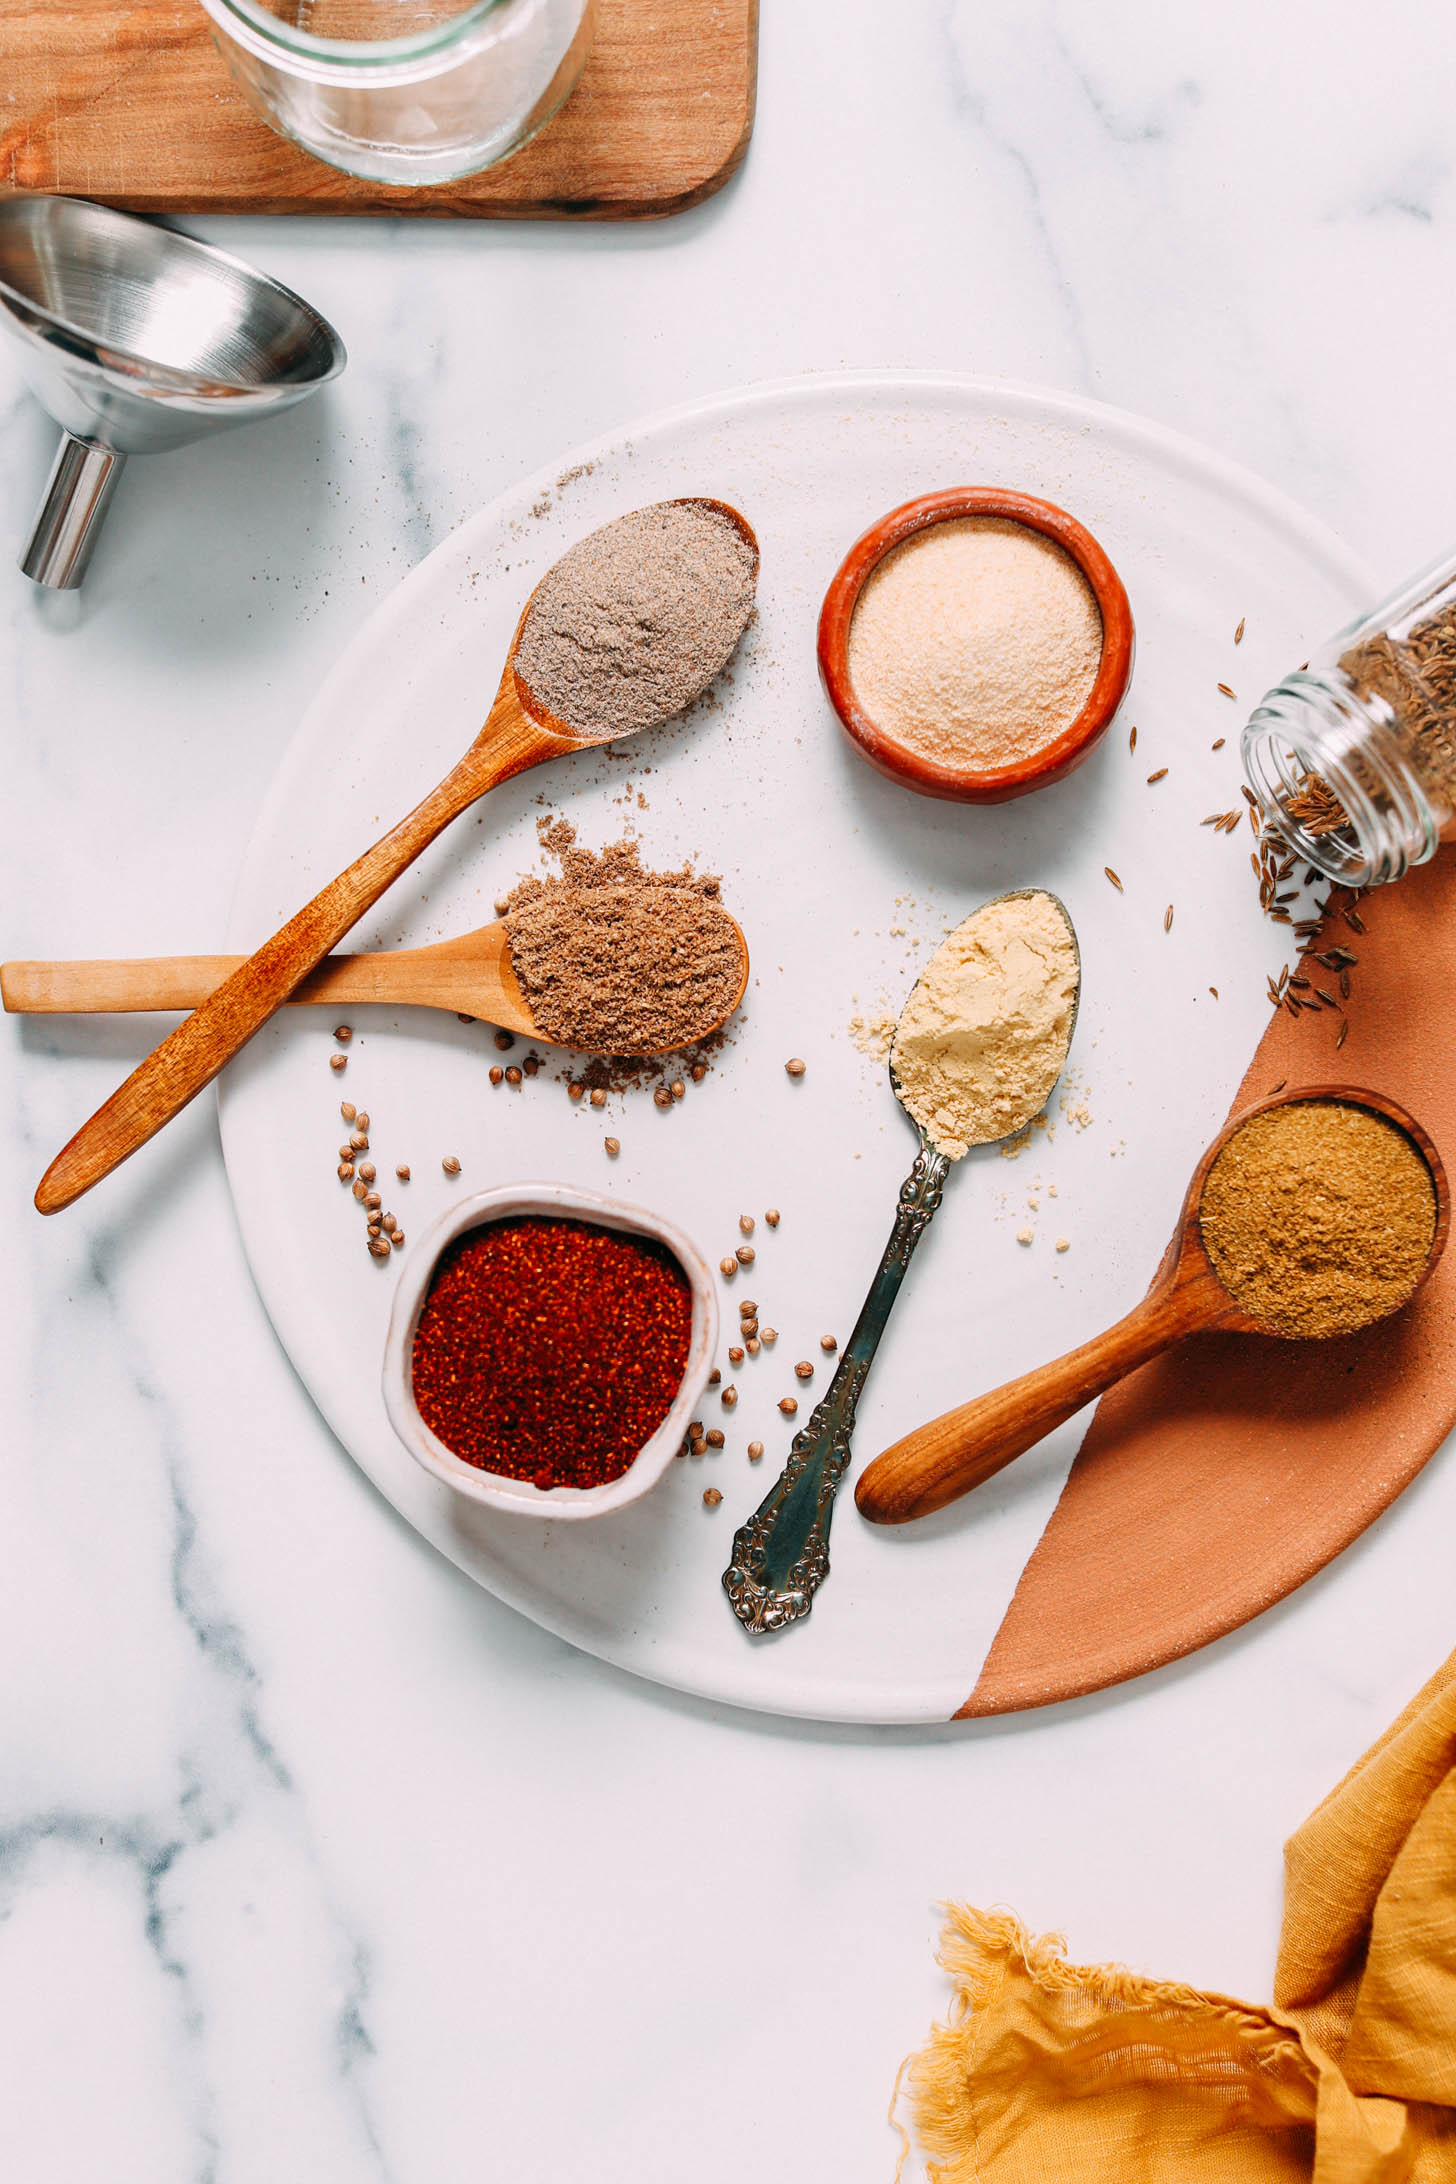 Spoonfuls and bowls of spices